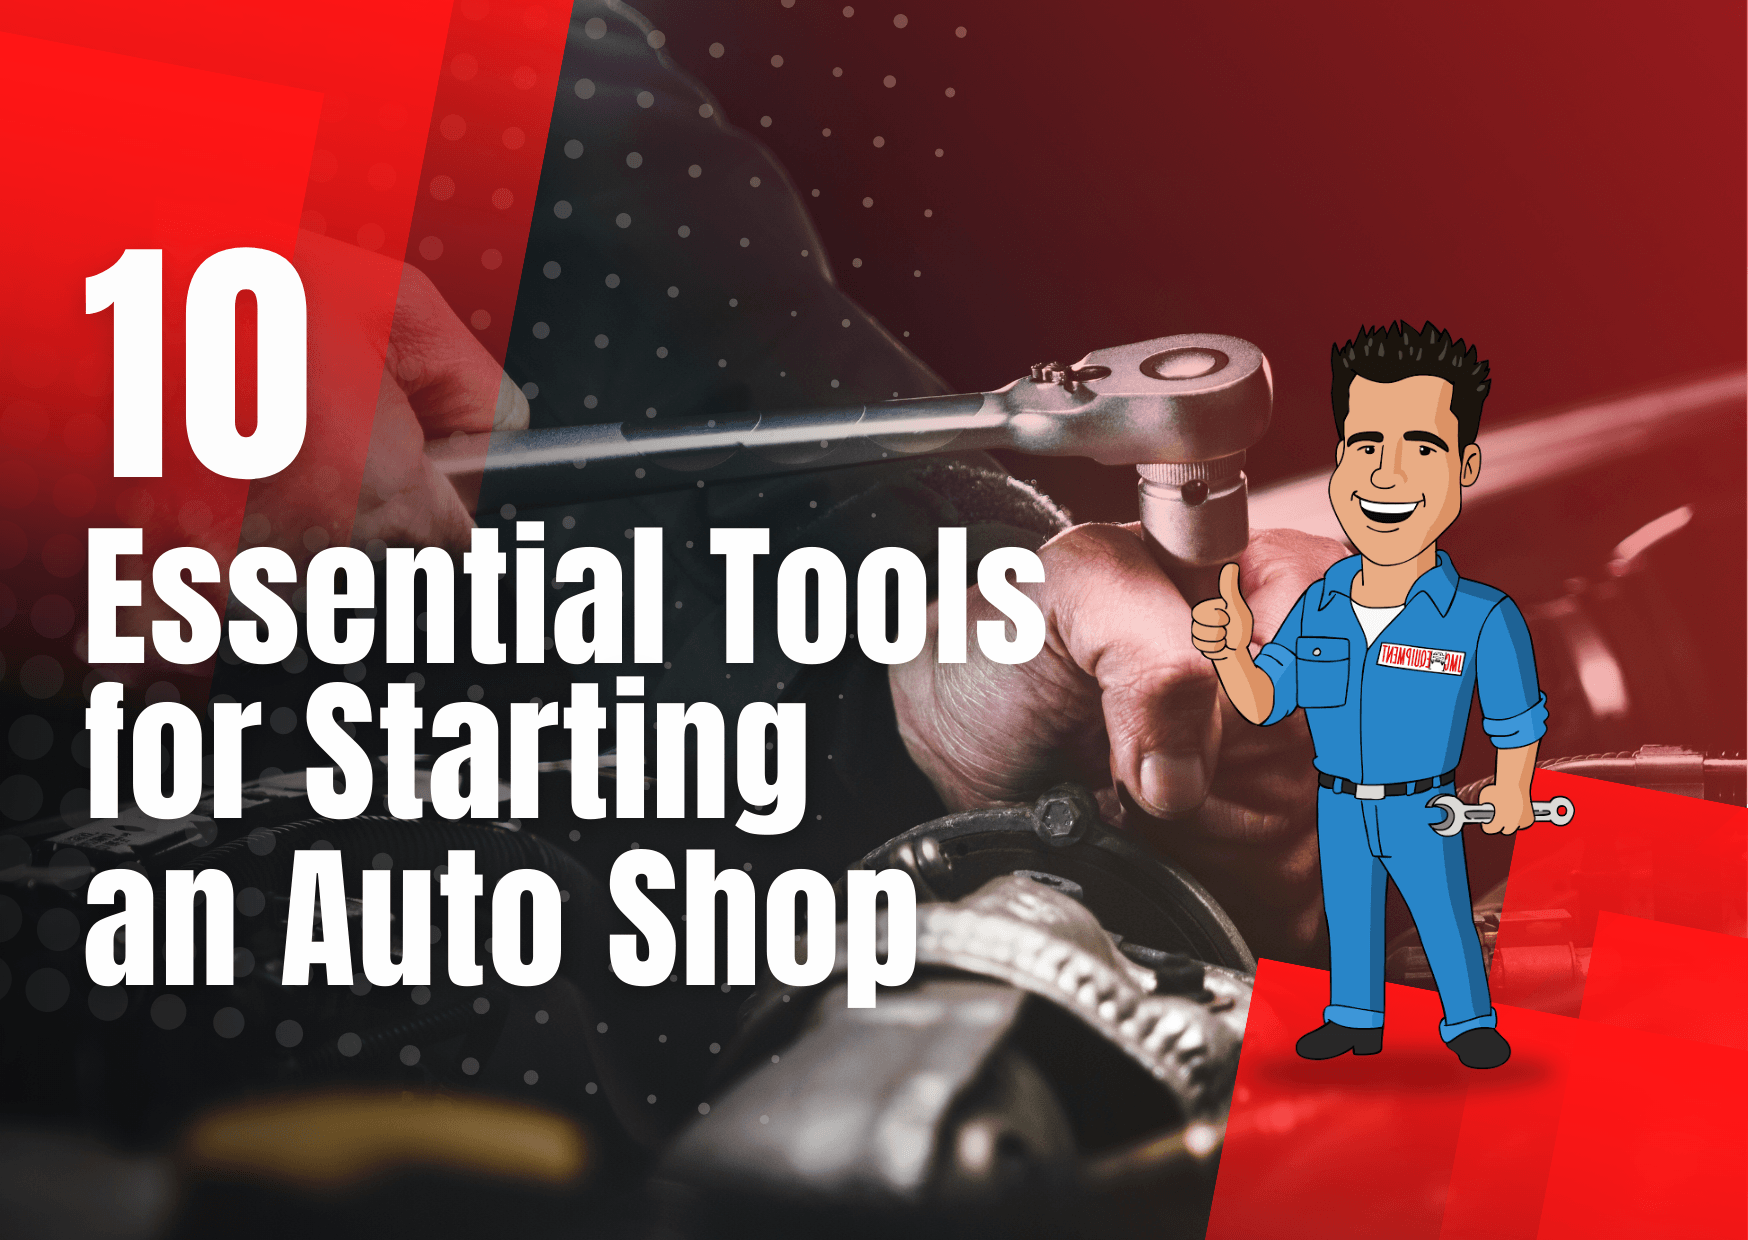 Ten Essential Tools and Equipment for Starting an Auto Shop - JMC Automotive  Equipment